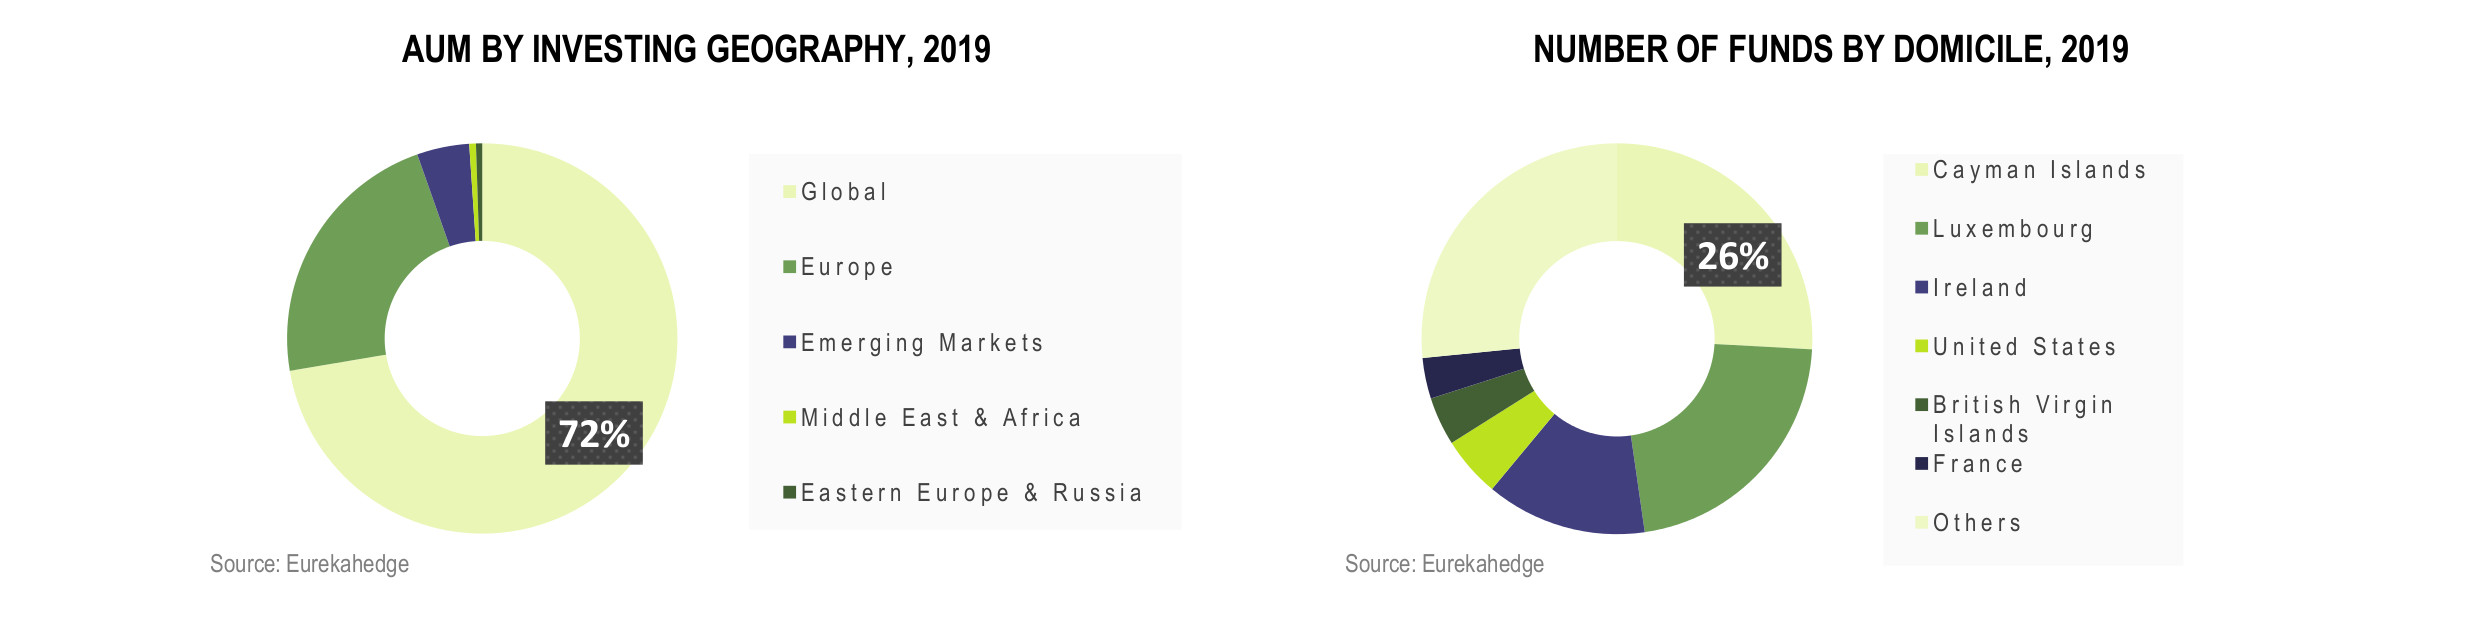 European Hedge Funds Infographic July 2019 - AUM by investing geography and number of funds by domicile 2019